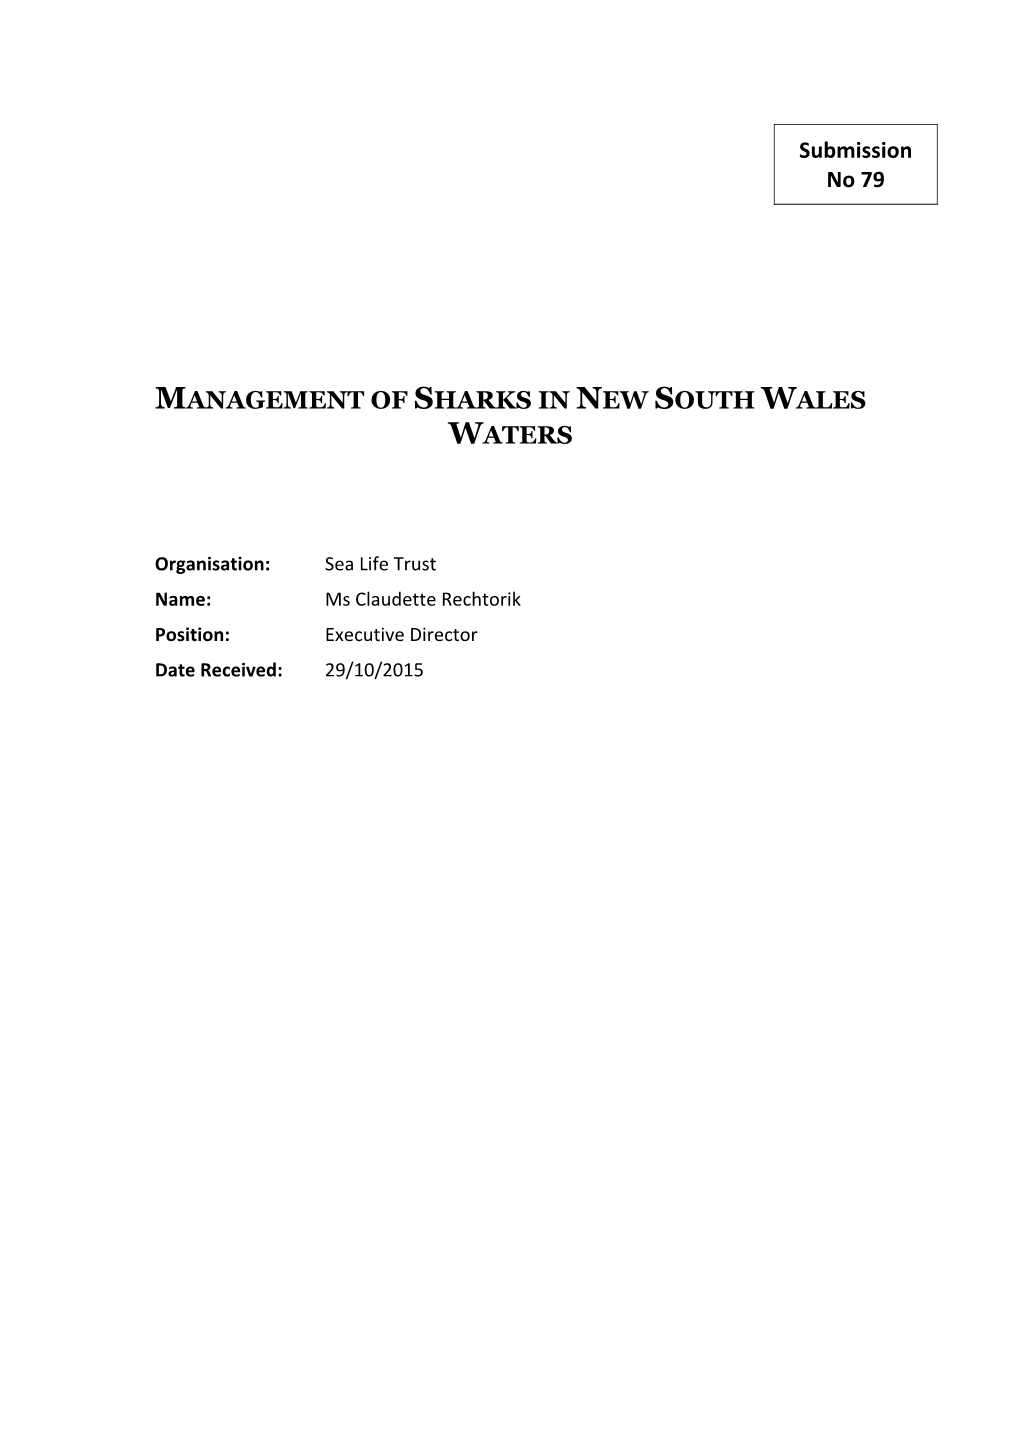 Management of Sharks in New South Wales Waters